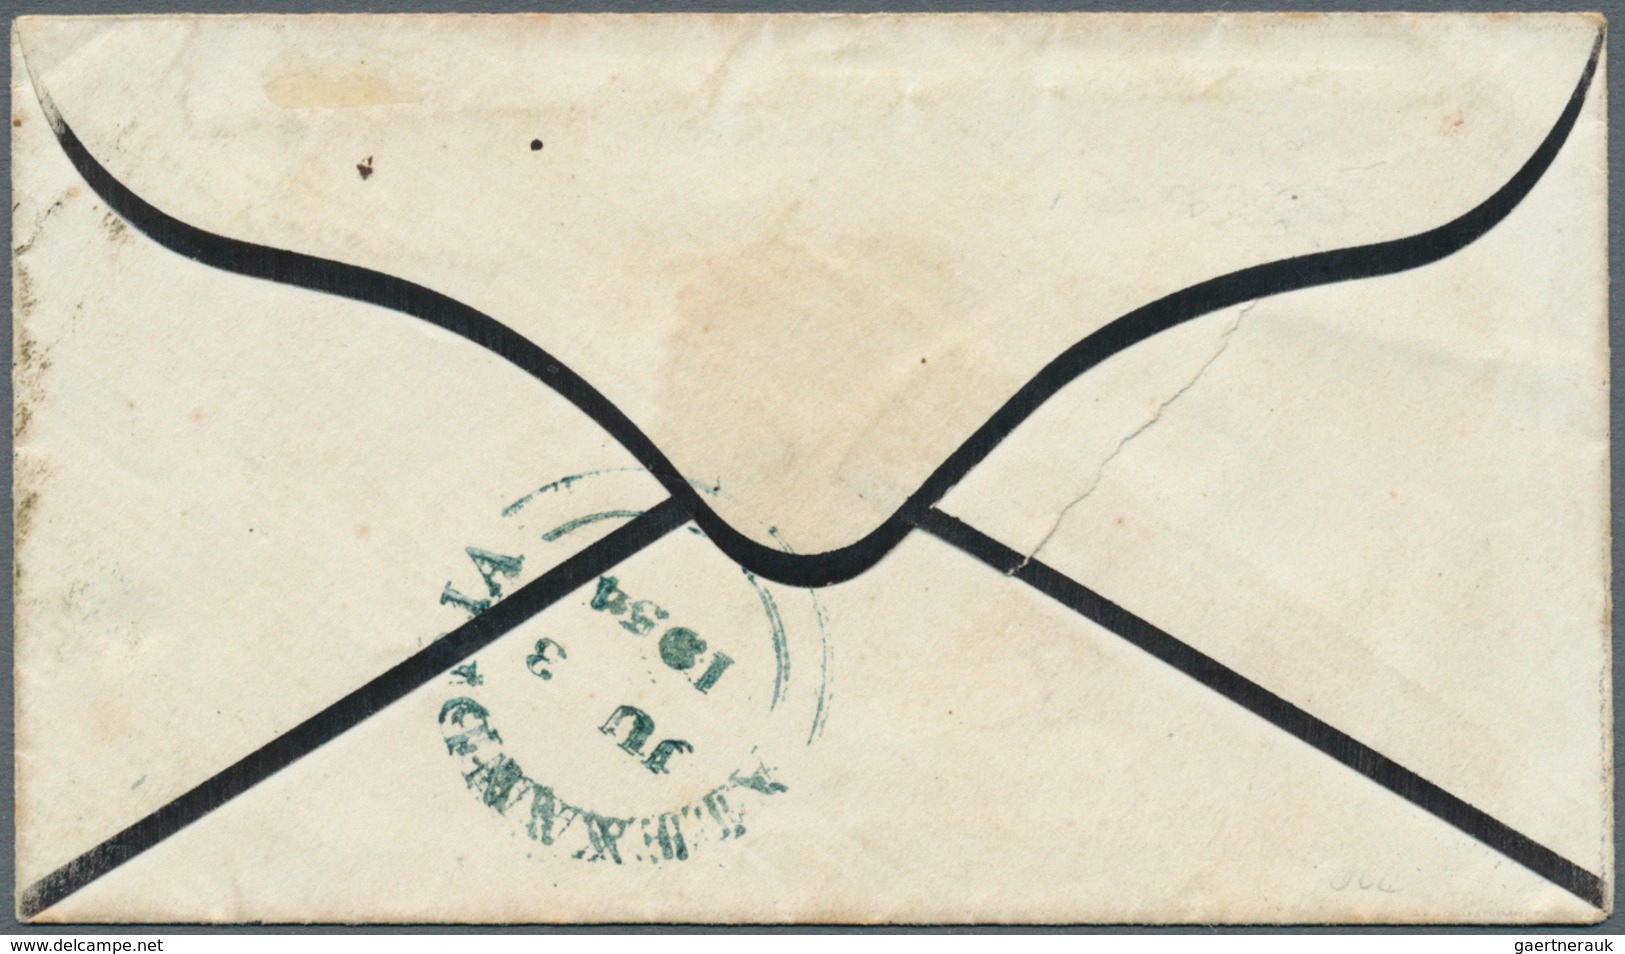 Ägypten: 1854, Folded Mourning Envelope From "GIBRALTAR 23/MAY/1854" Addressed To The "army In The E - 1866-1914 Khedivate Of Egypt